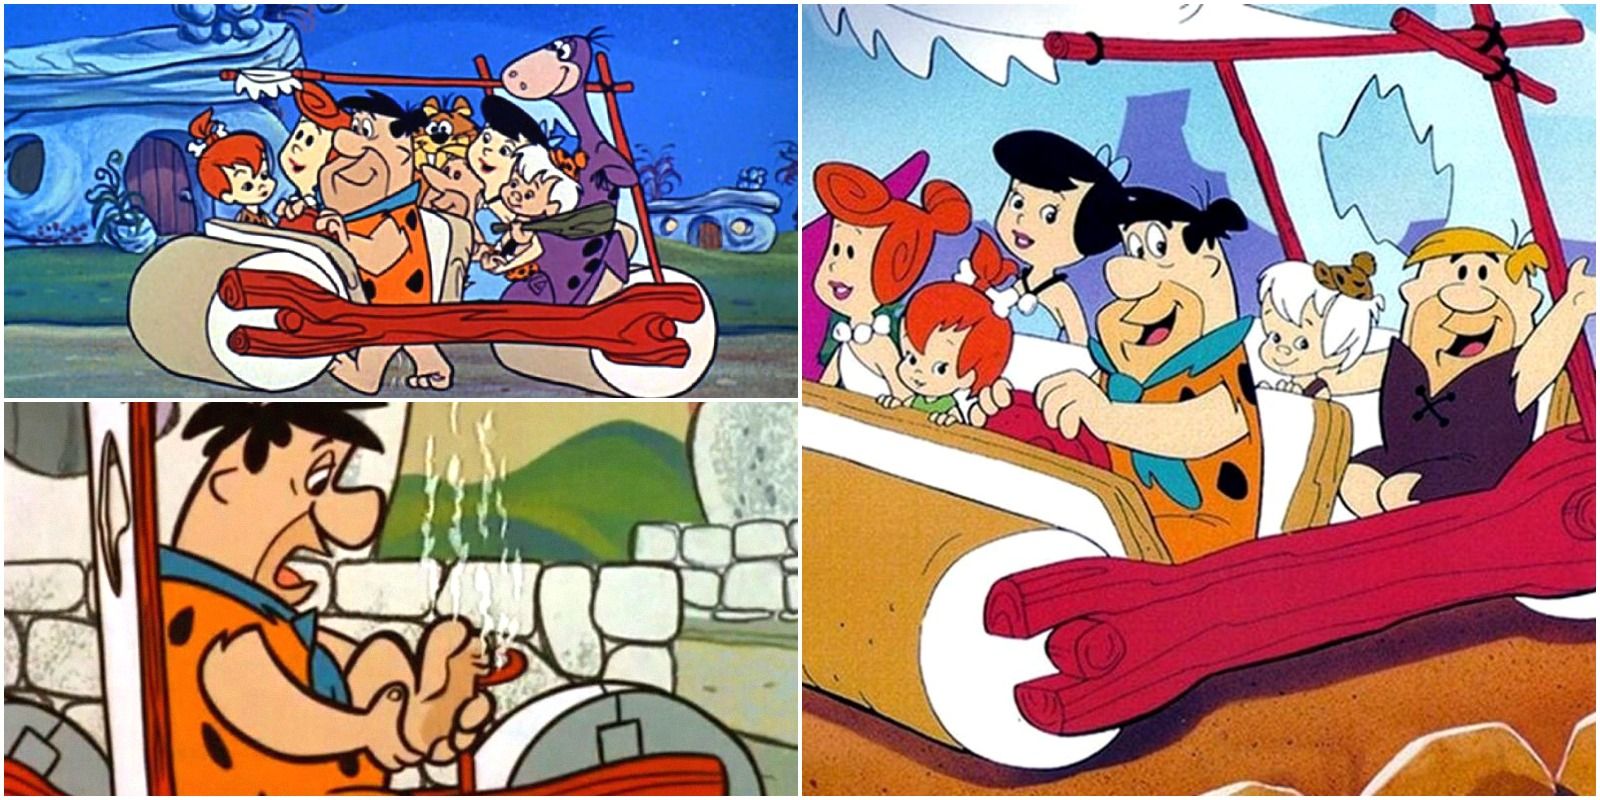 Fred Flintstone &quot;driving&quot; his car with his family from the '60s cartoon